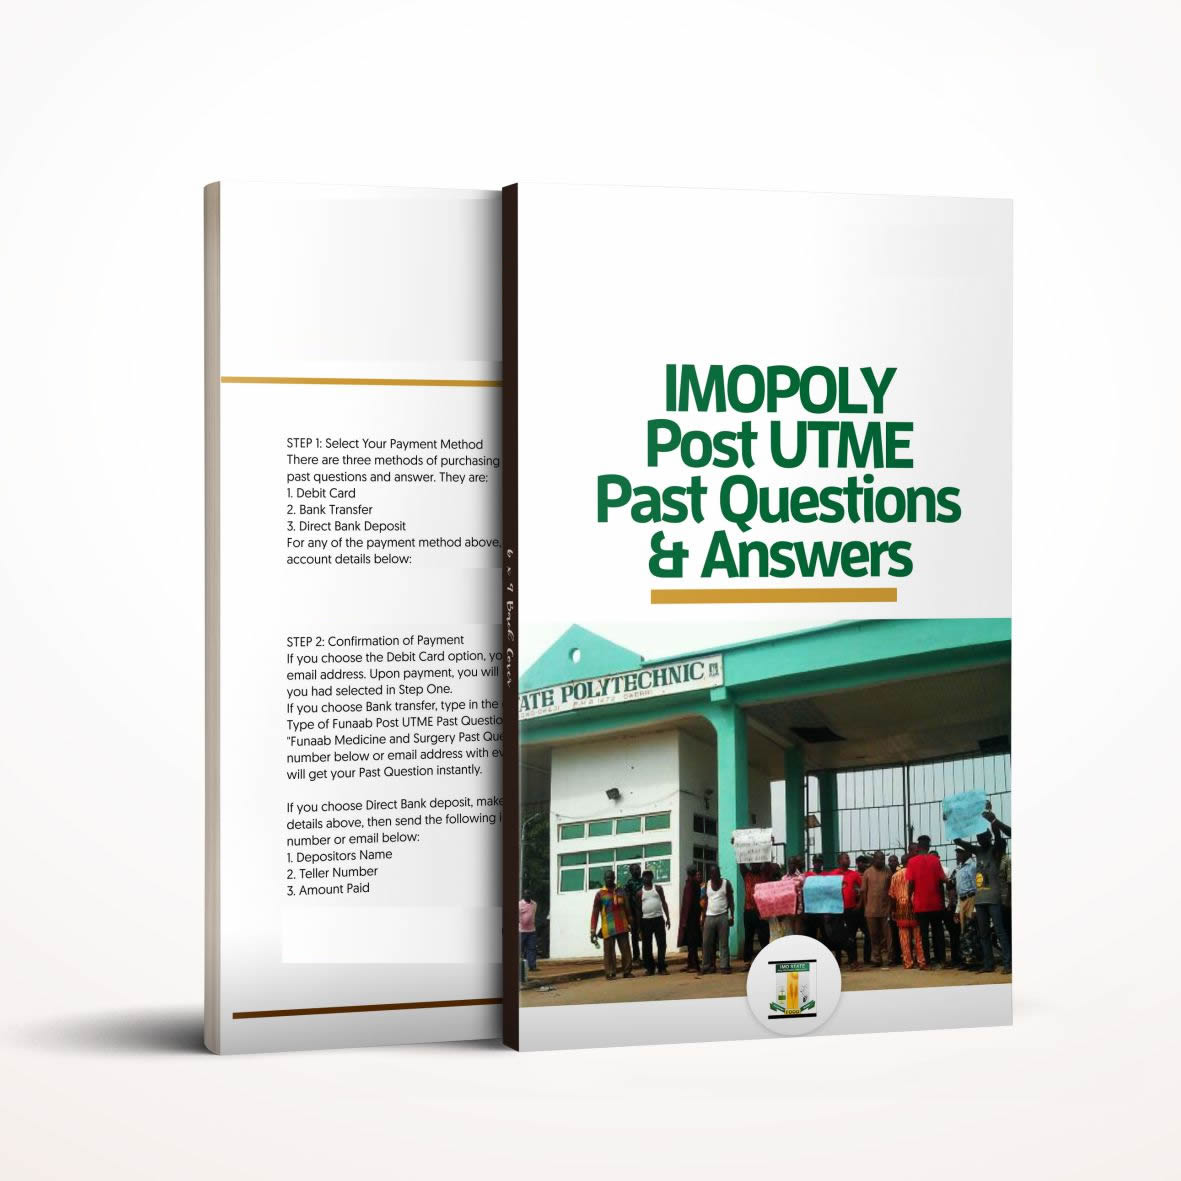 IMOPOLY Post UTME past questions and answers